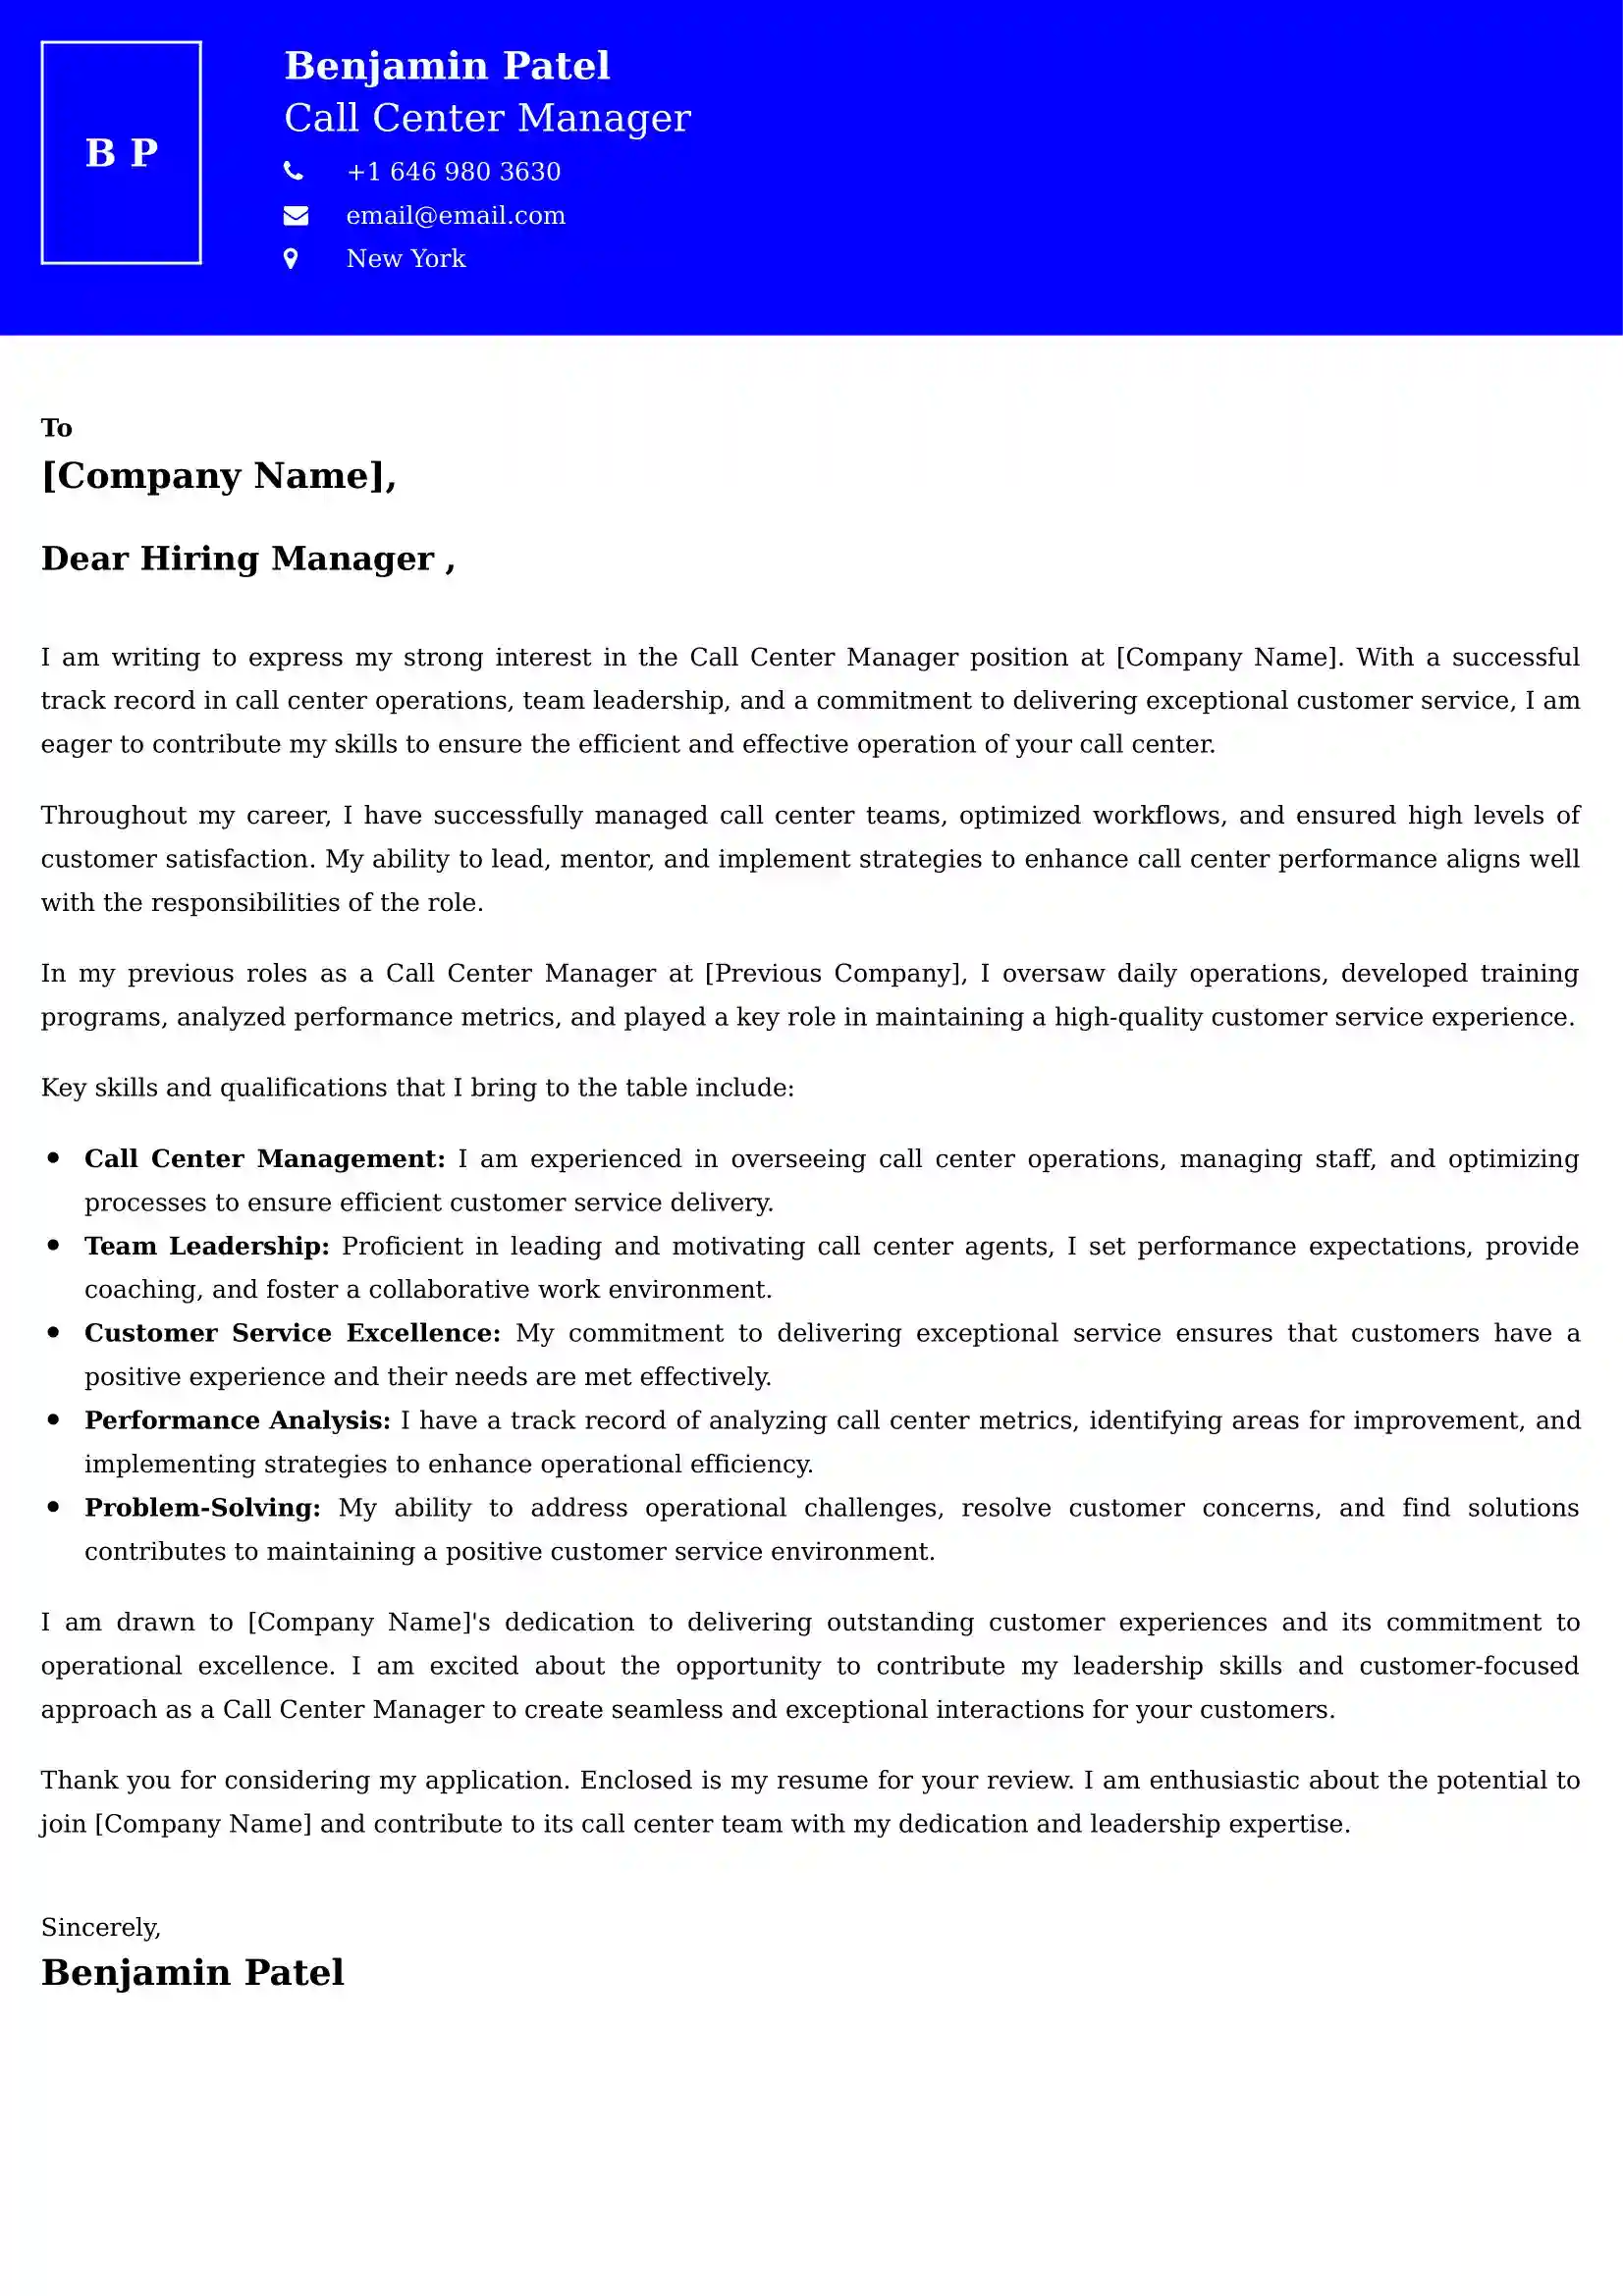 Call Center Manager Cover Letter Examples UAE - ATS Format